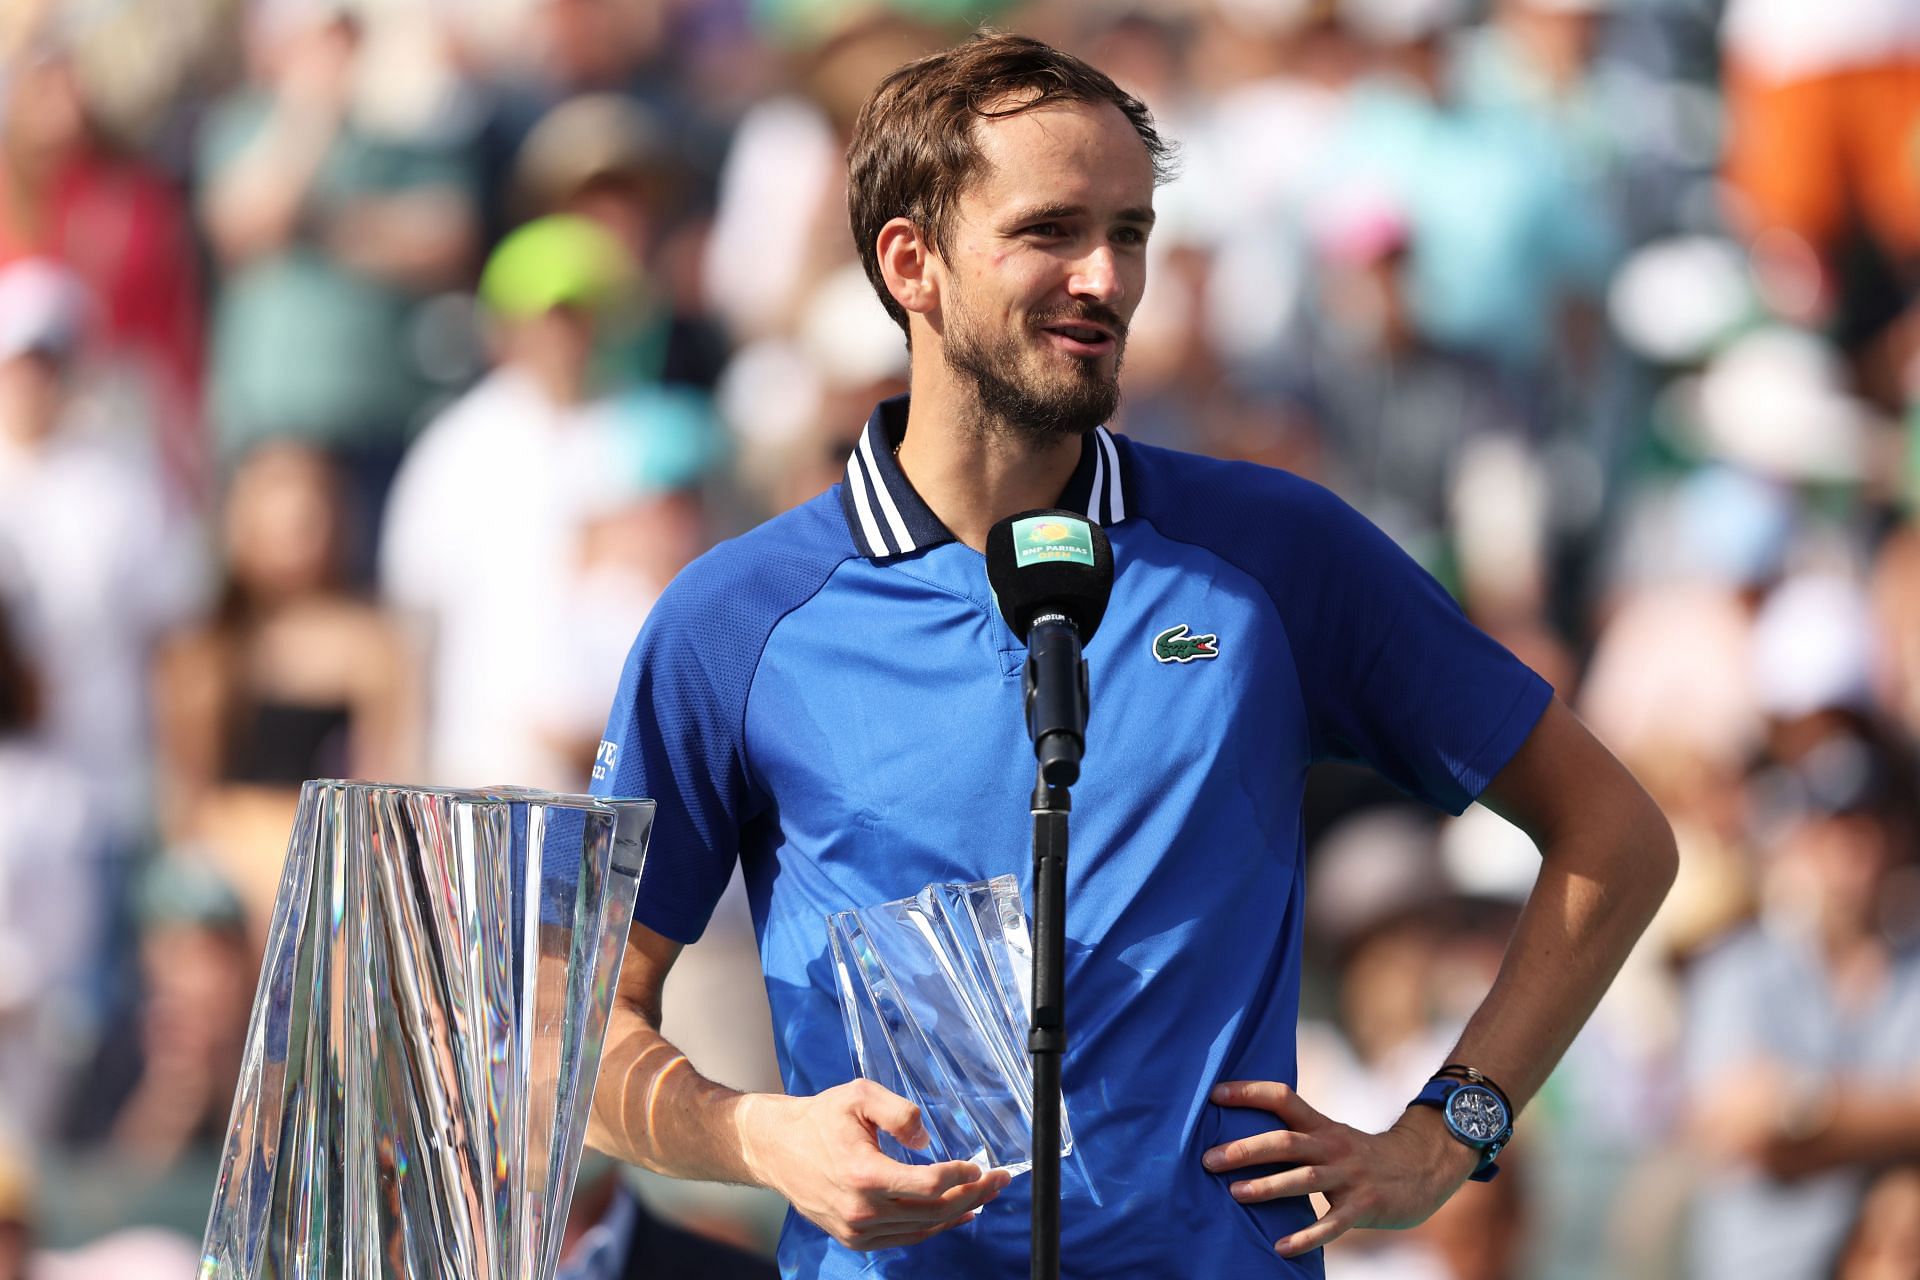 Medvedev was the runner up at Indian Wells.